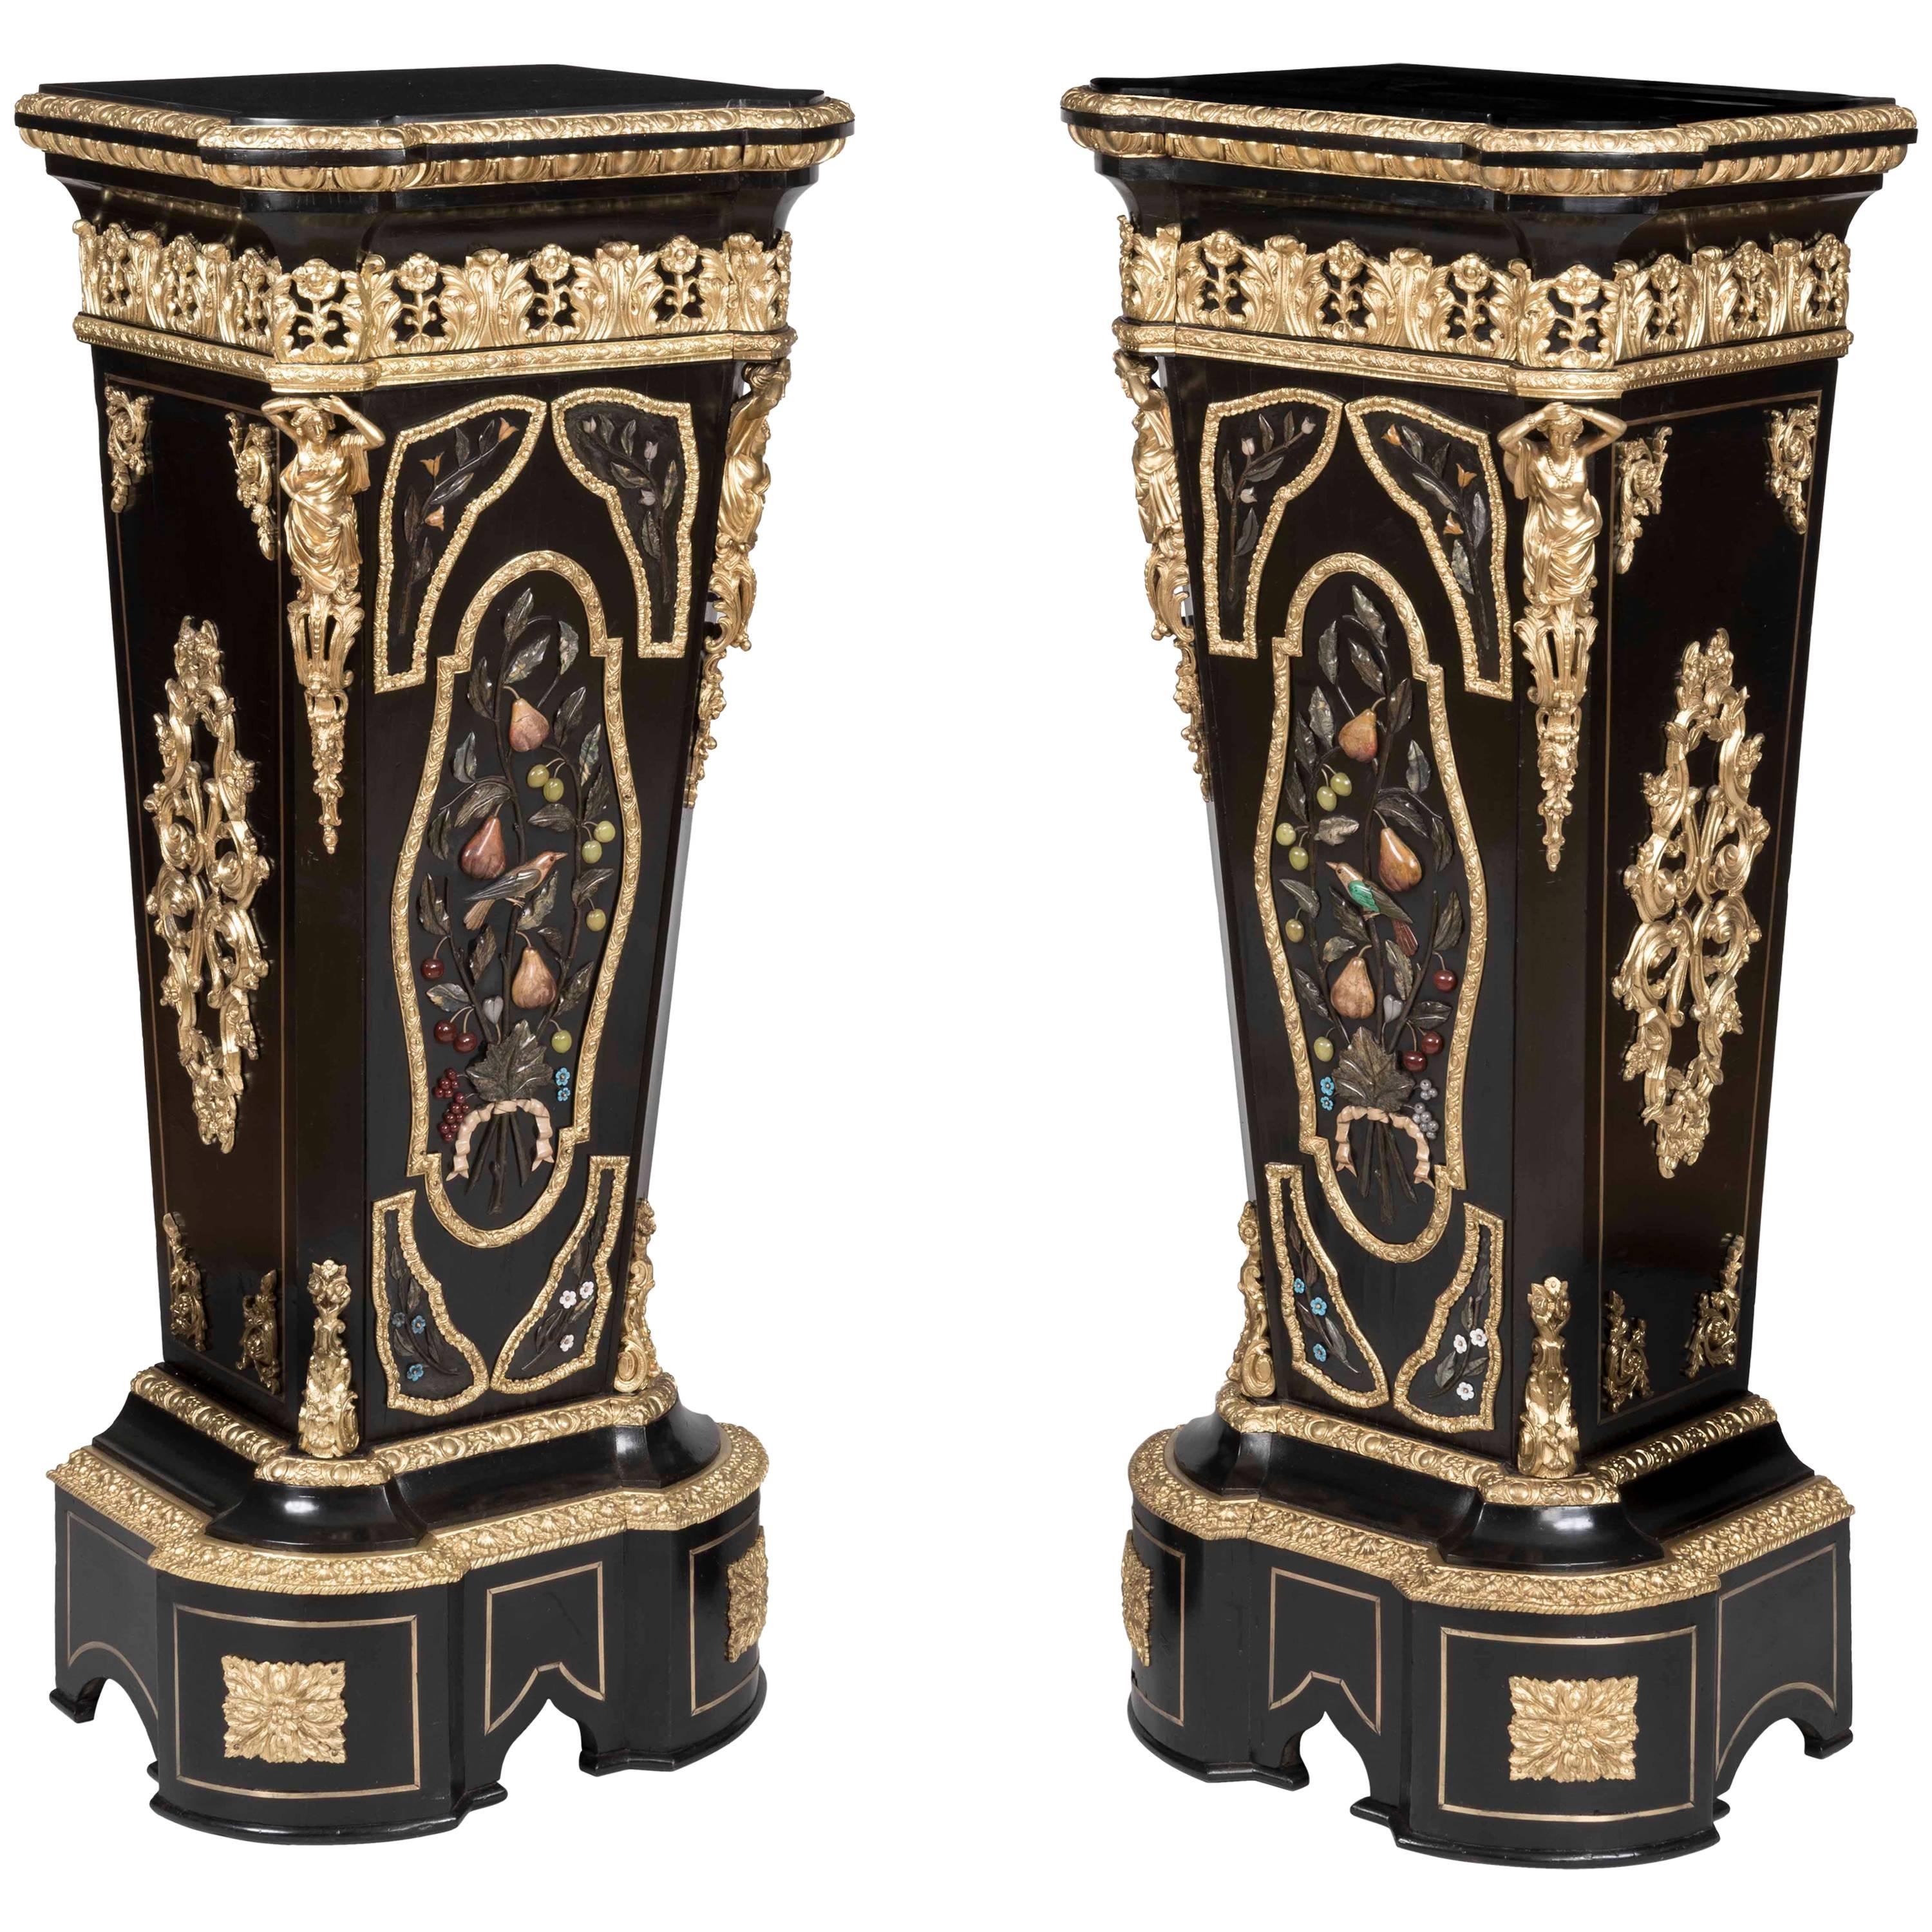 French 19th Century Pair of Pietra Dura Pedestals in the Manner of Befort Fils